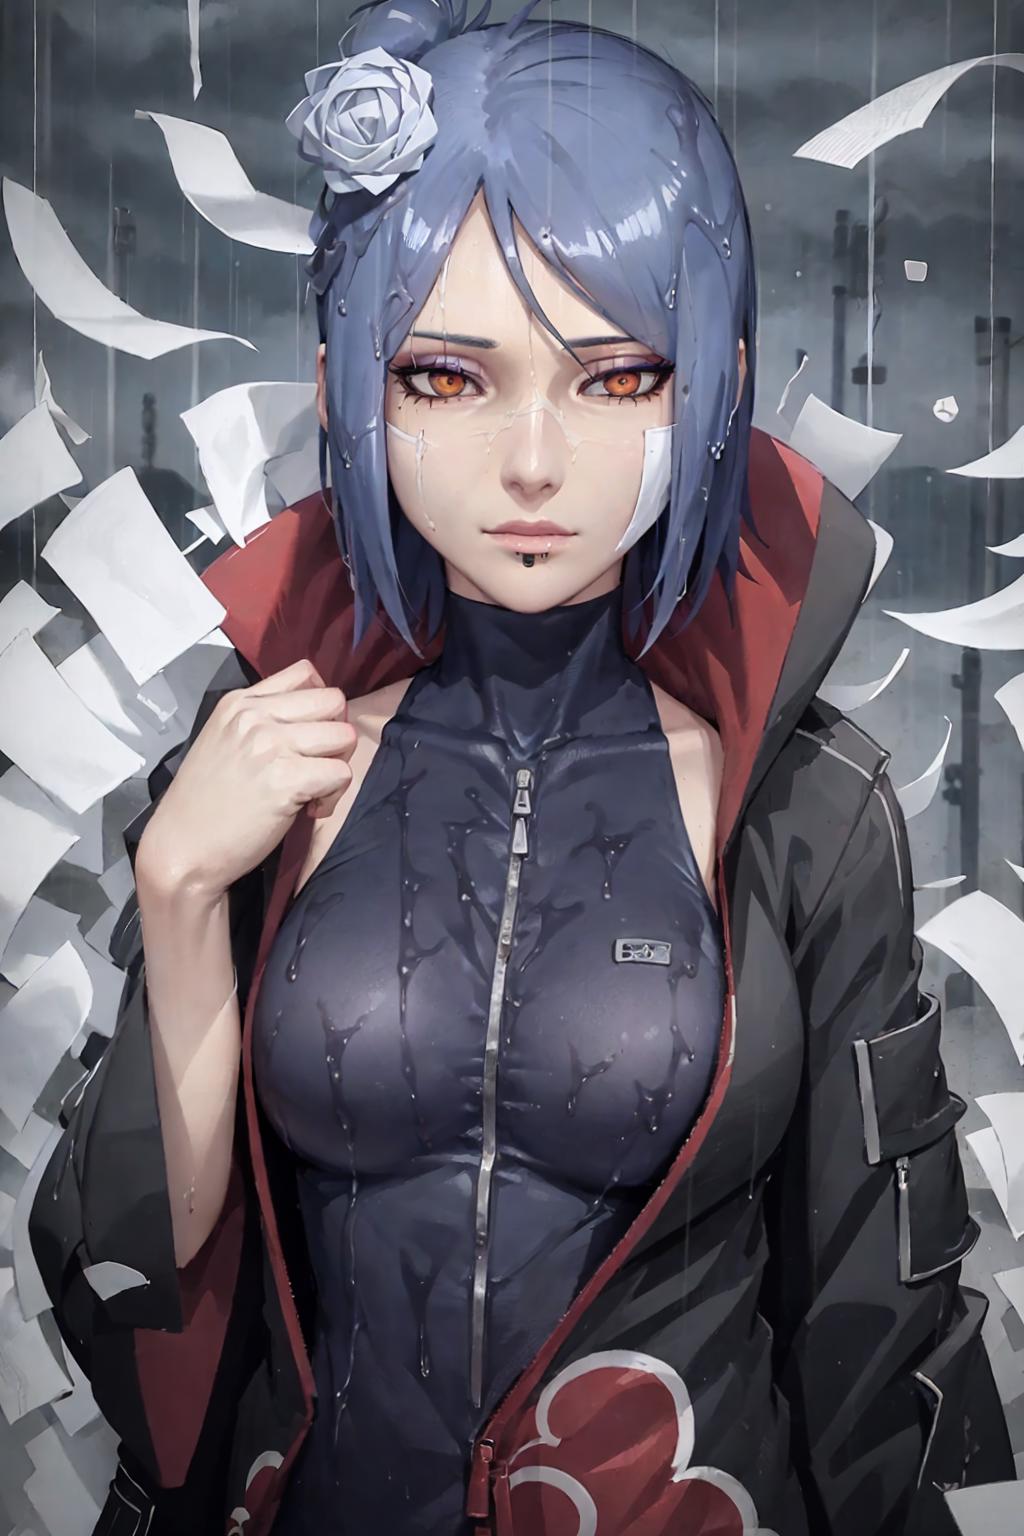 A cartoon illustration of a woman with blue hair and a black outfit, holding her arm up to her face.